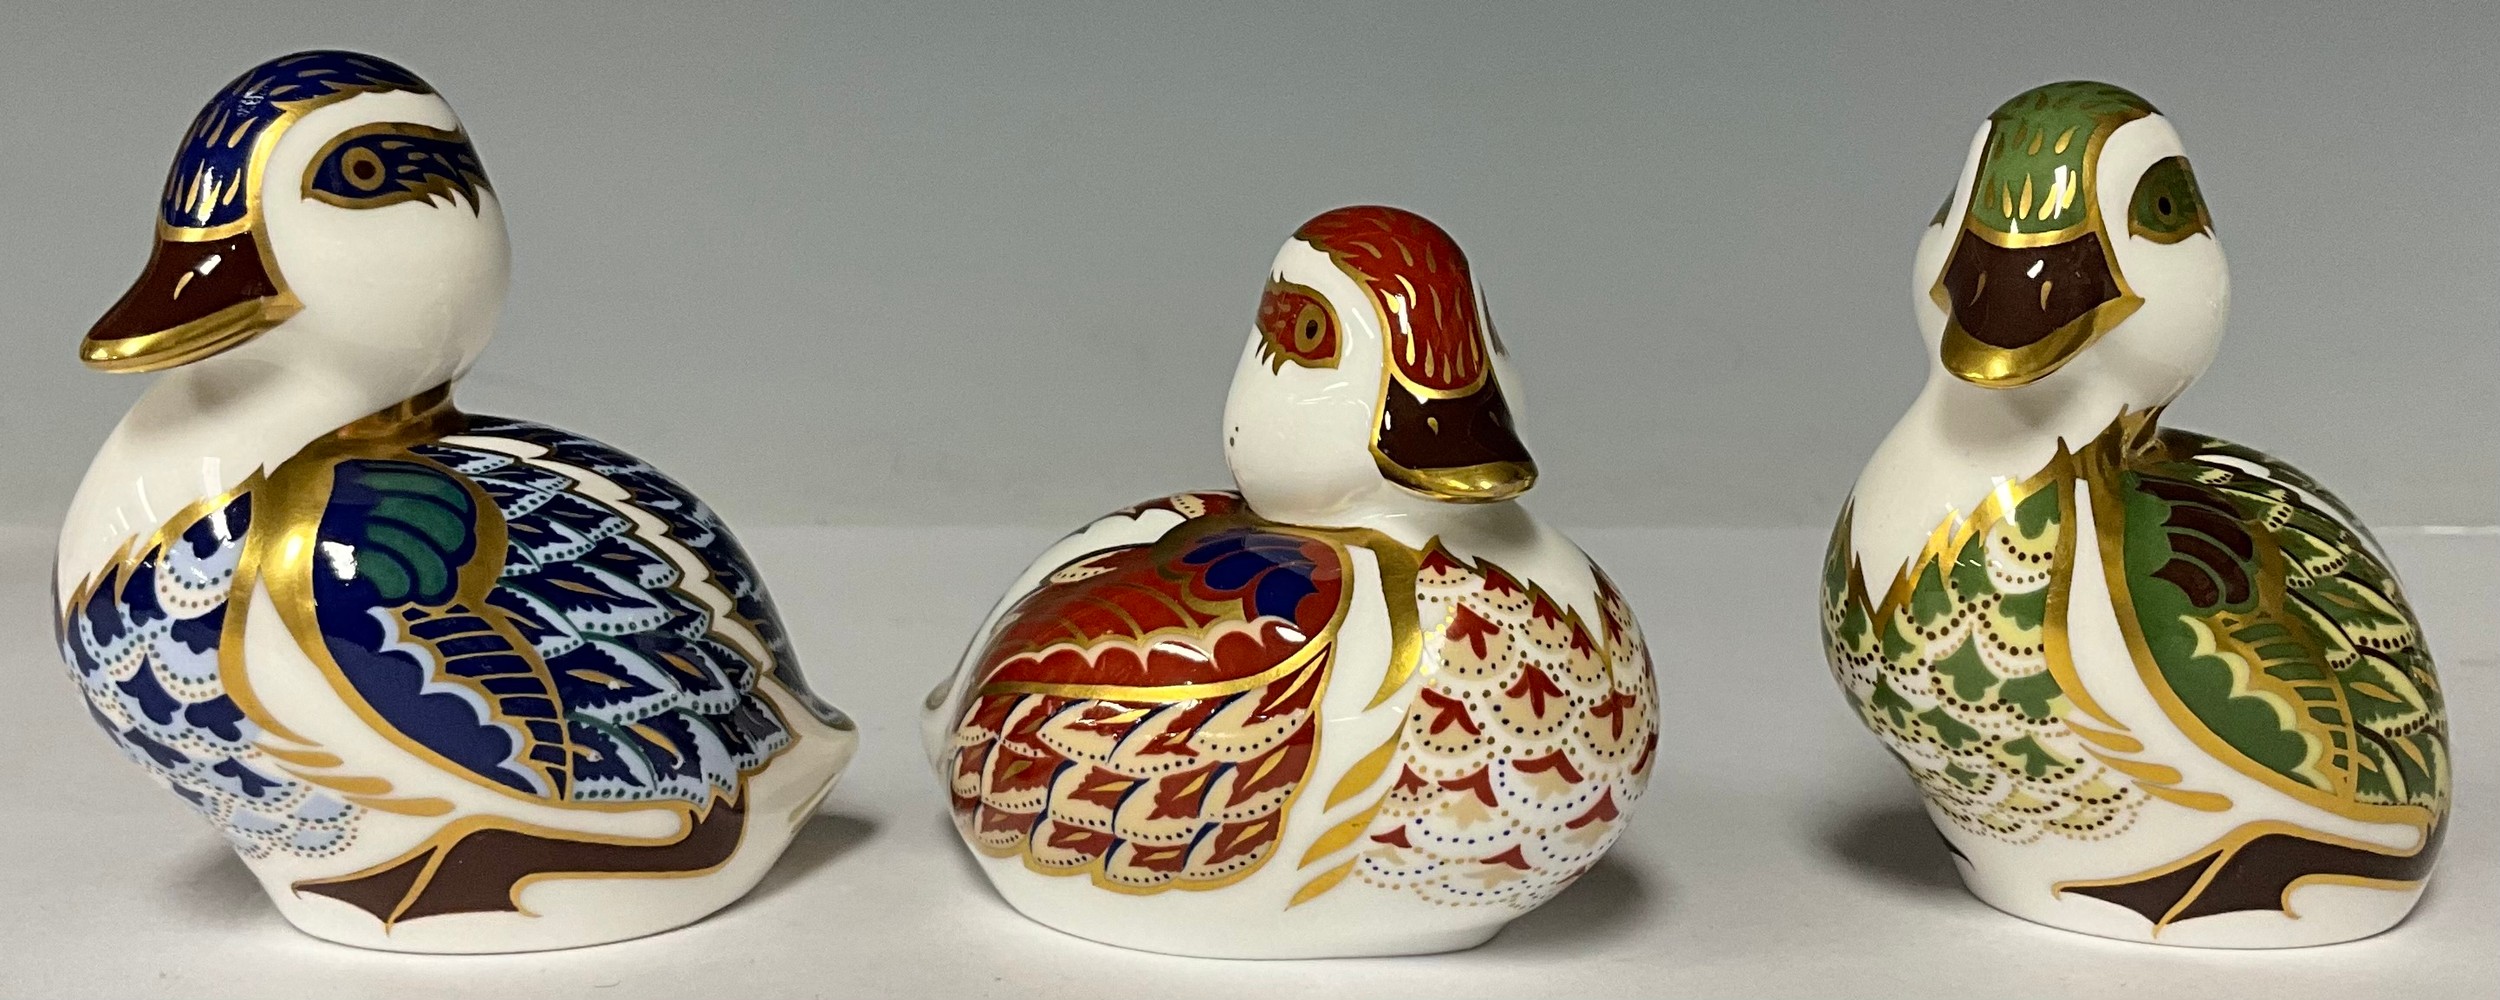 A Royal Crown Derby paperweight, Derbyshire Duckling, one of an exclusive edition commissioned by